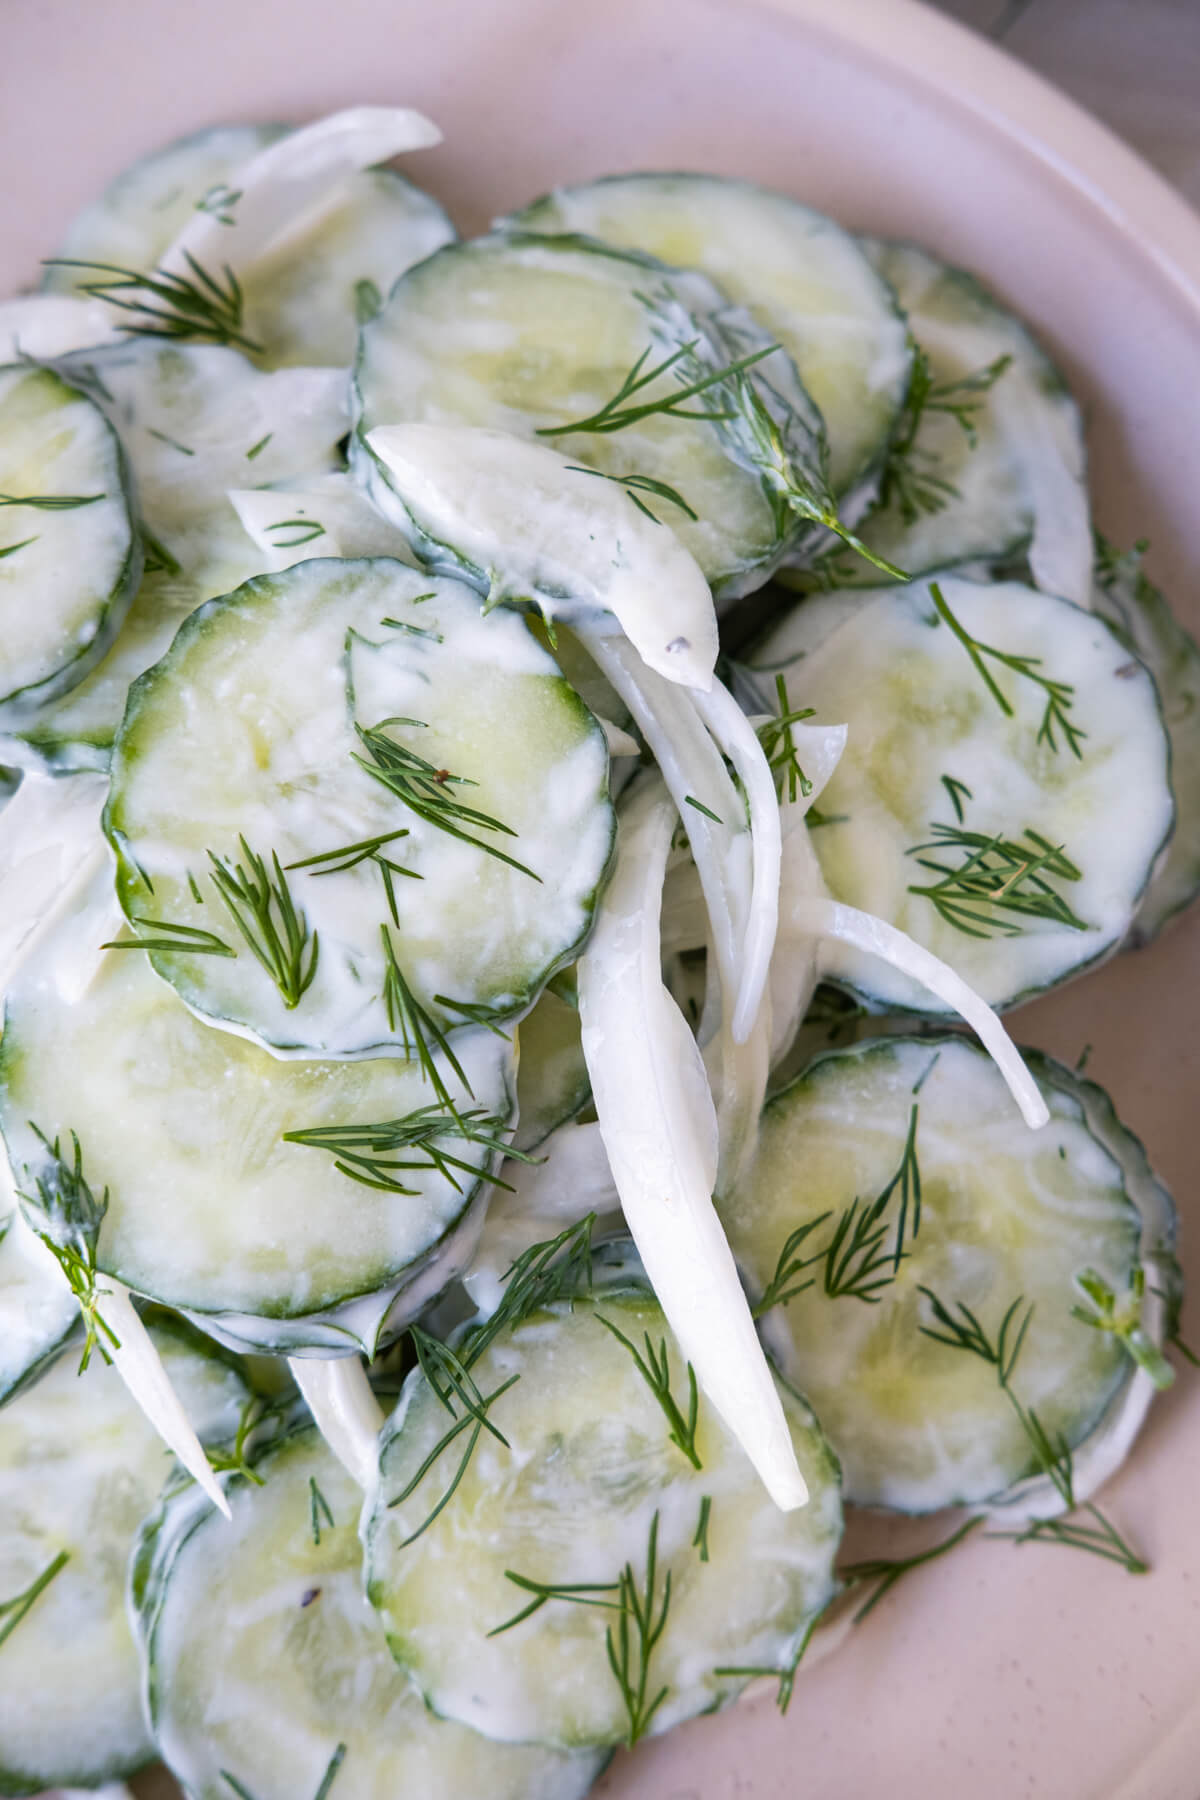 Creamy cucumber salad with white onion slices on a white plate garnished with chopped dill. 